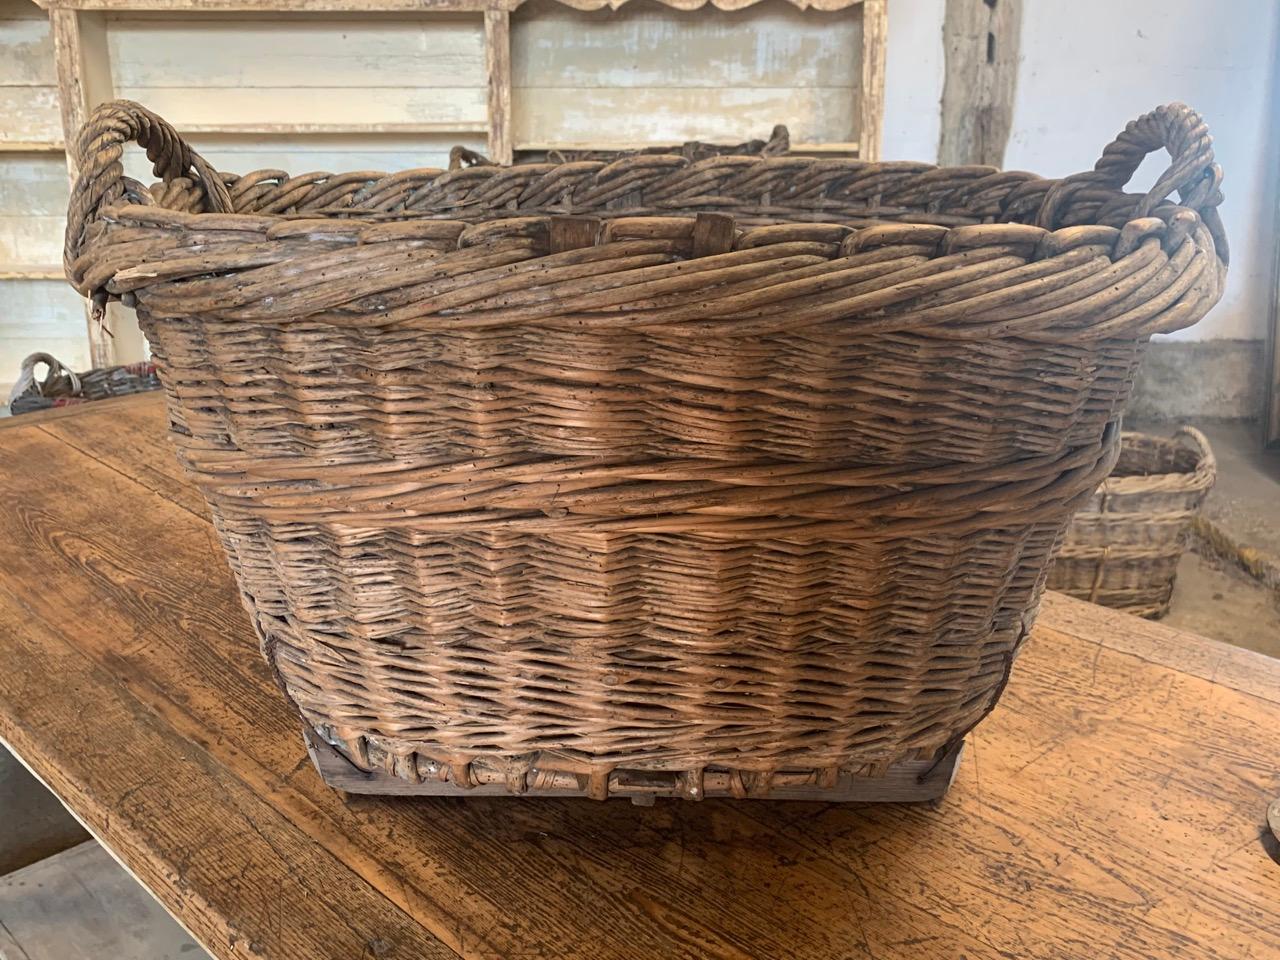 A nice early 20th century grape harvesting basket from the Champagne region of France. These were used to harvest the grapes in the vineyards and still have the painted markings of the vineyard owner, circa 1900.
 